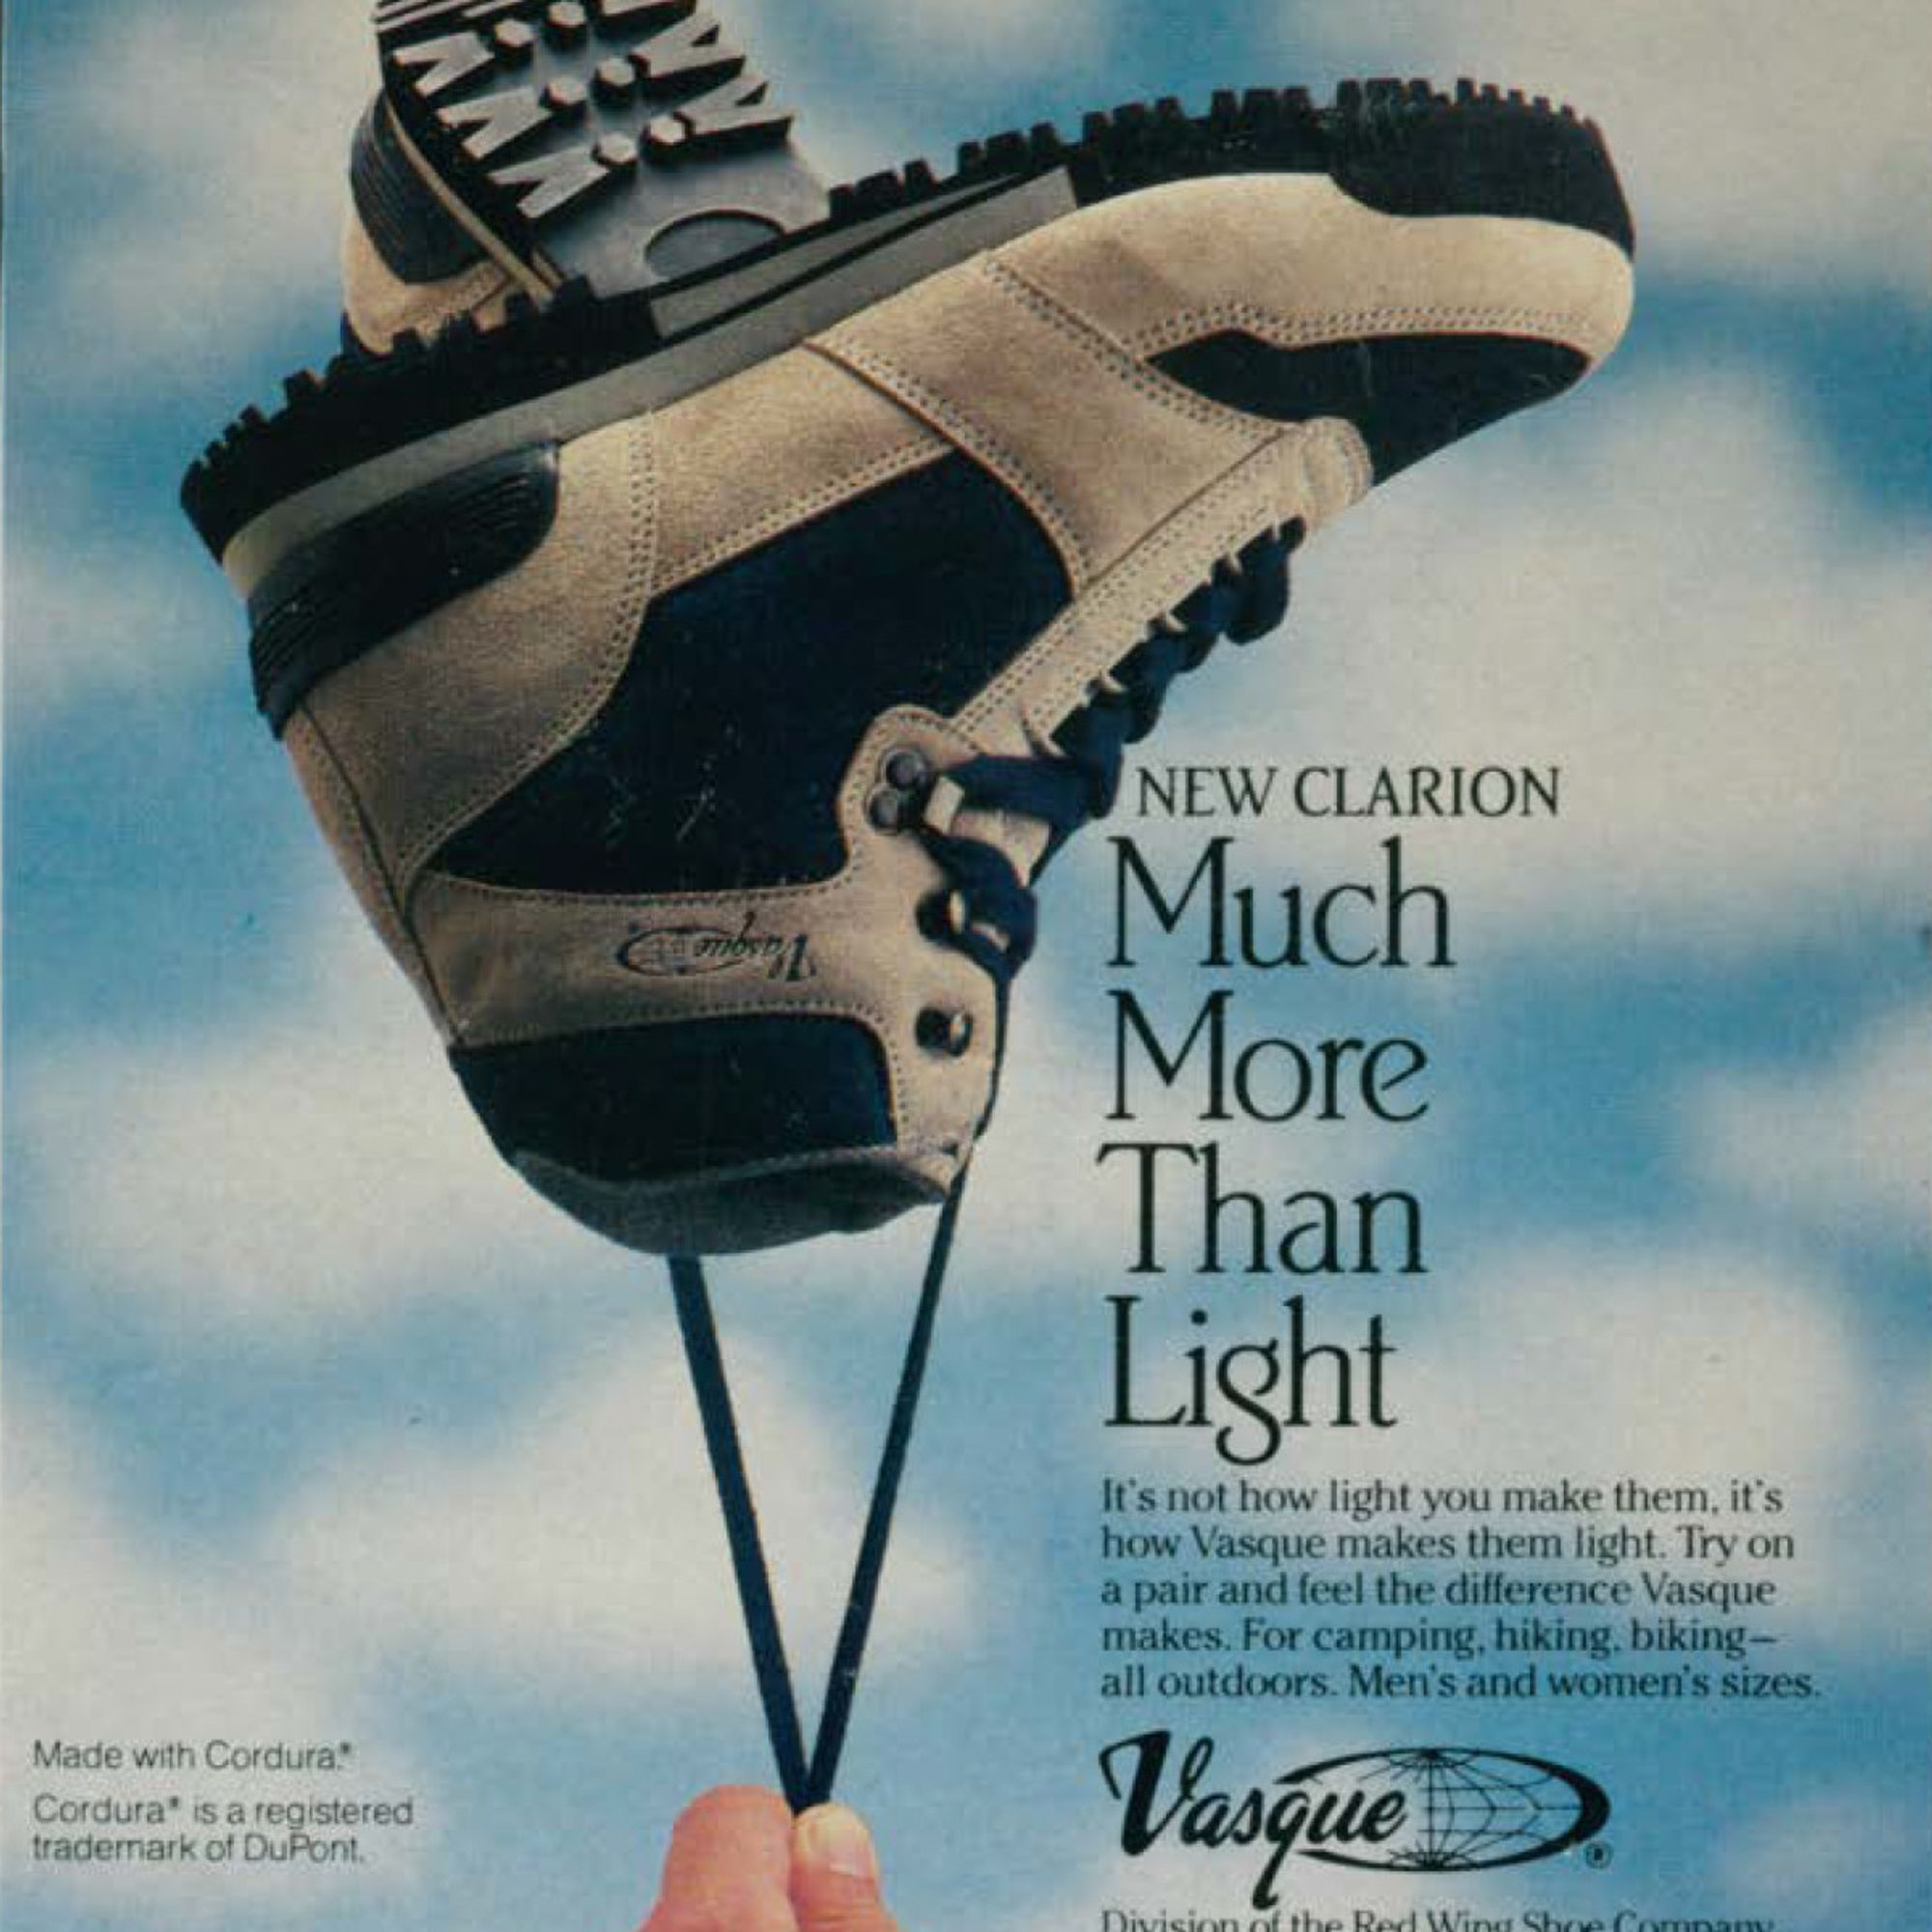 New Clarion Much More Than Light. It's not how light you make them, it's how Vasque makes them light.